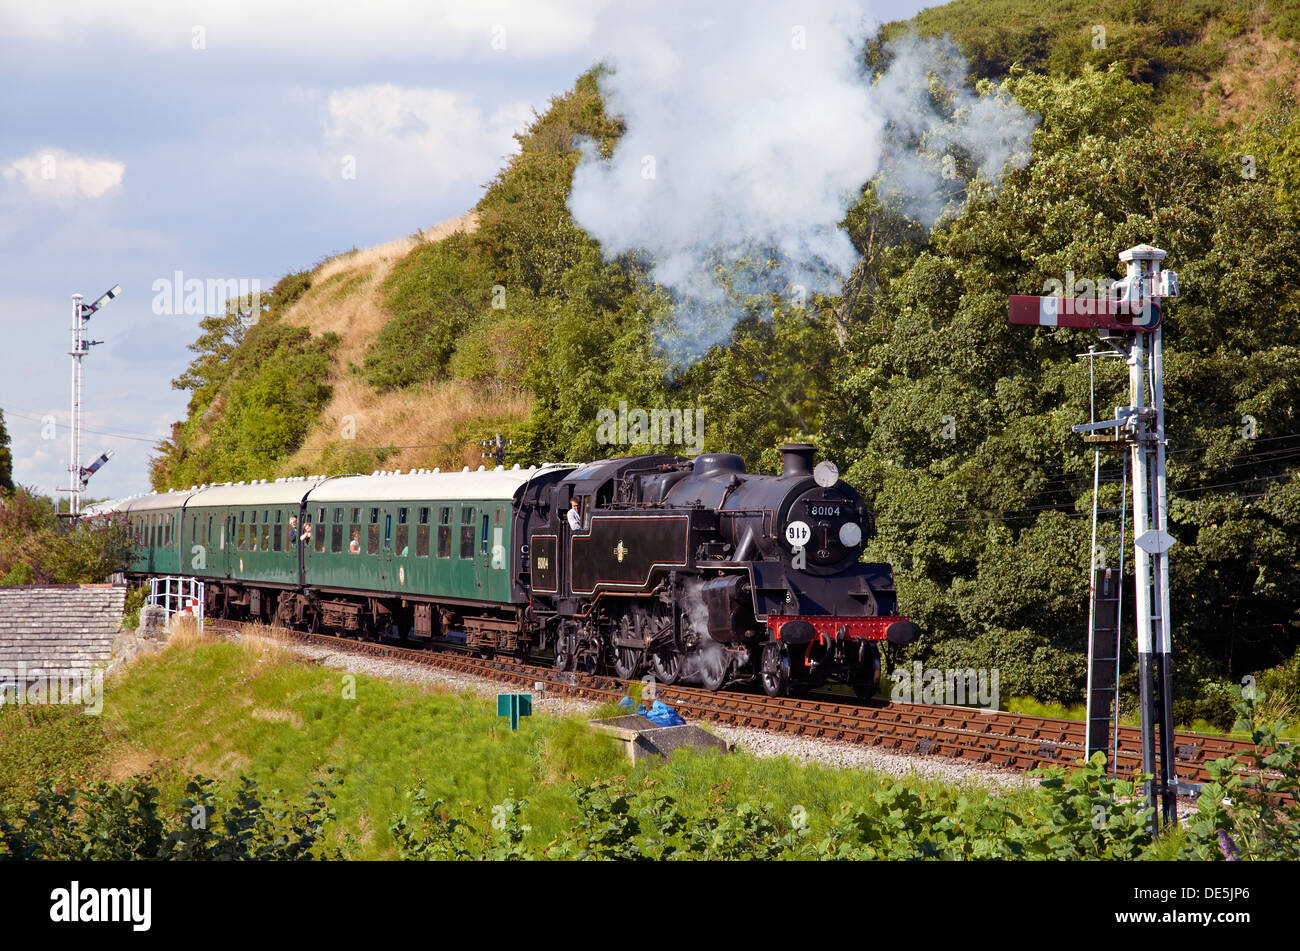 Steam train on the Swanage Railway running into  Corfe Castle station, Dorset, England with a train for Swanage. Stock Photo